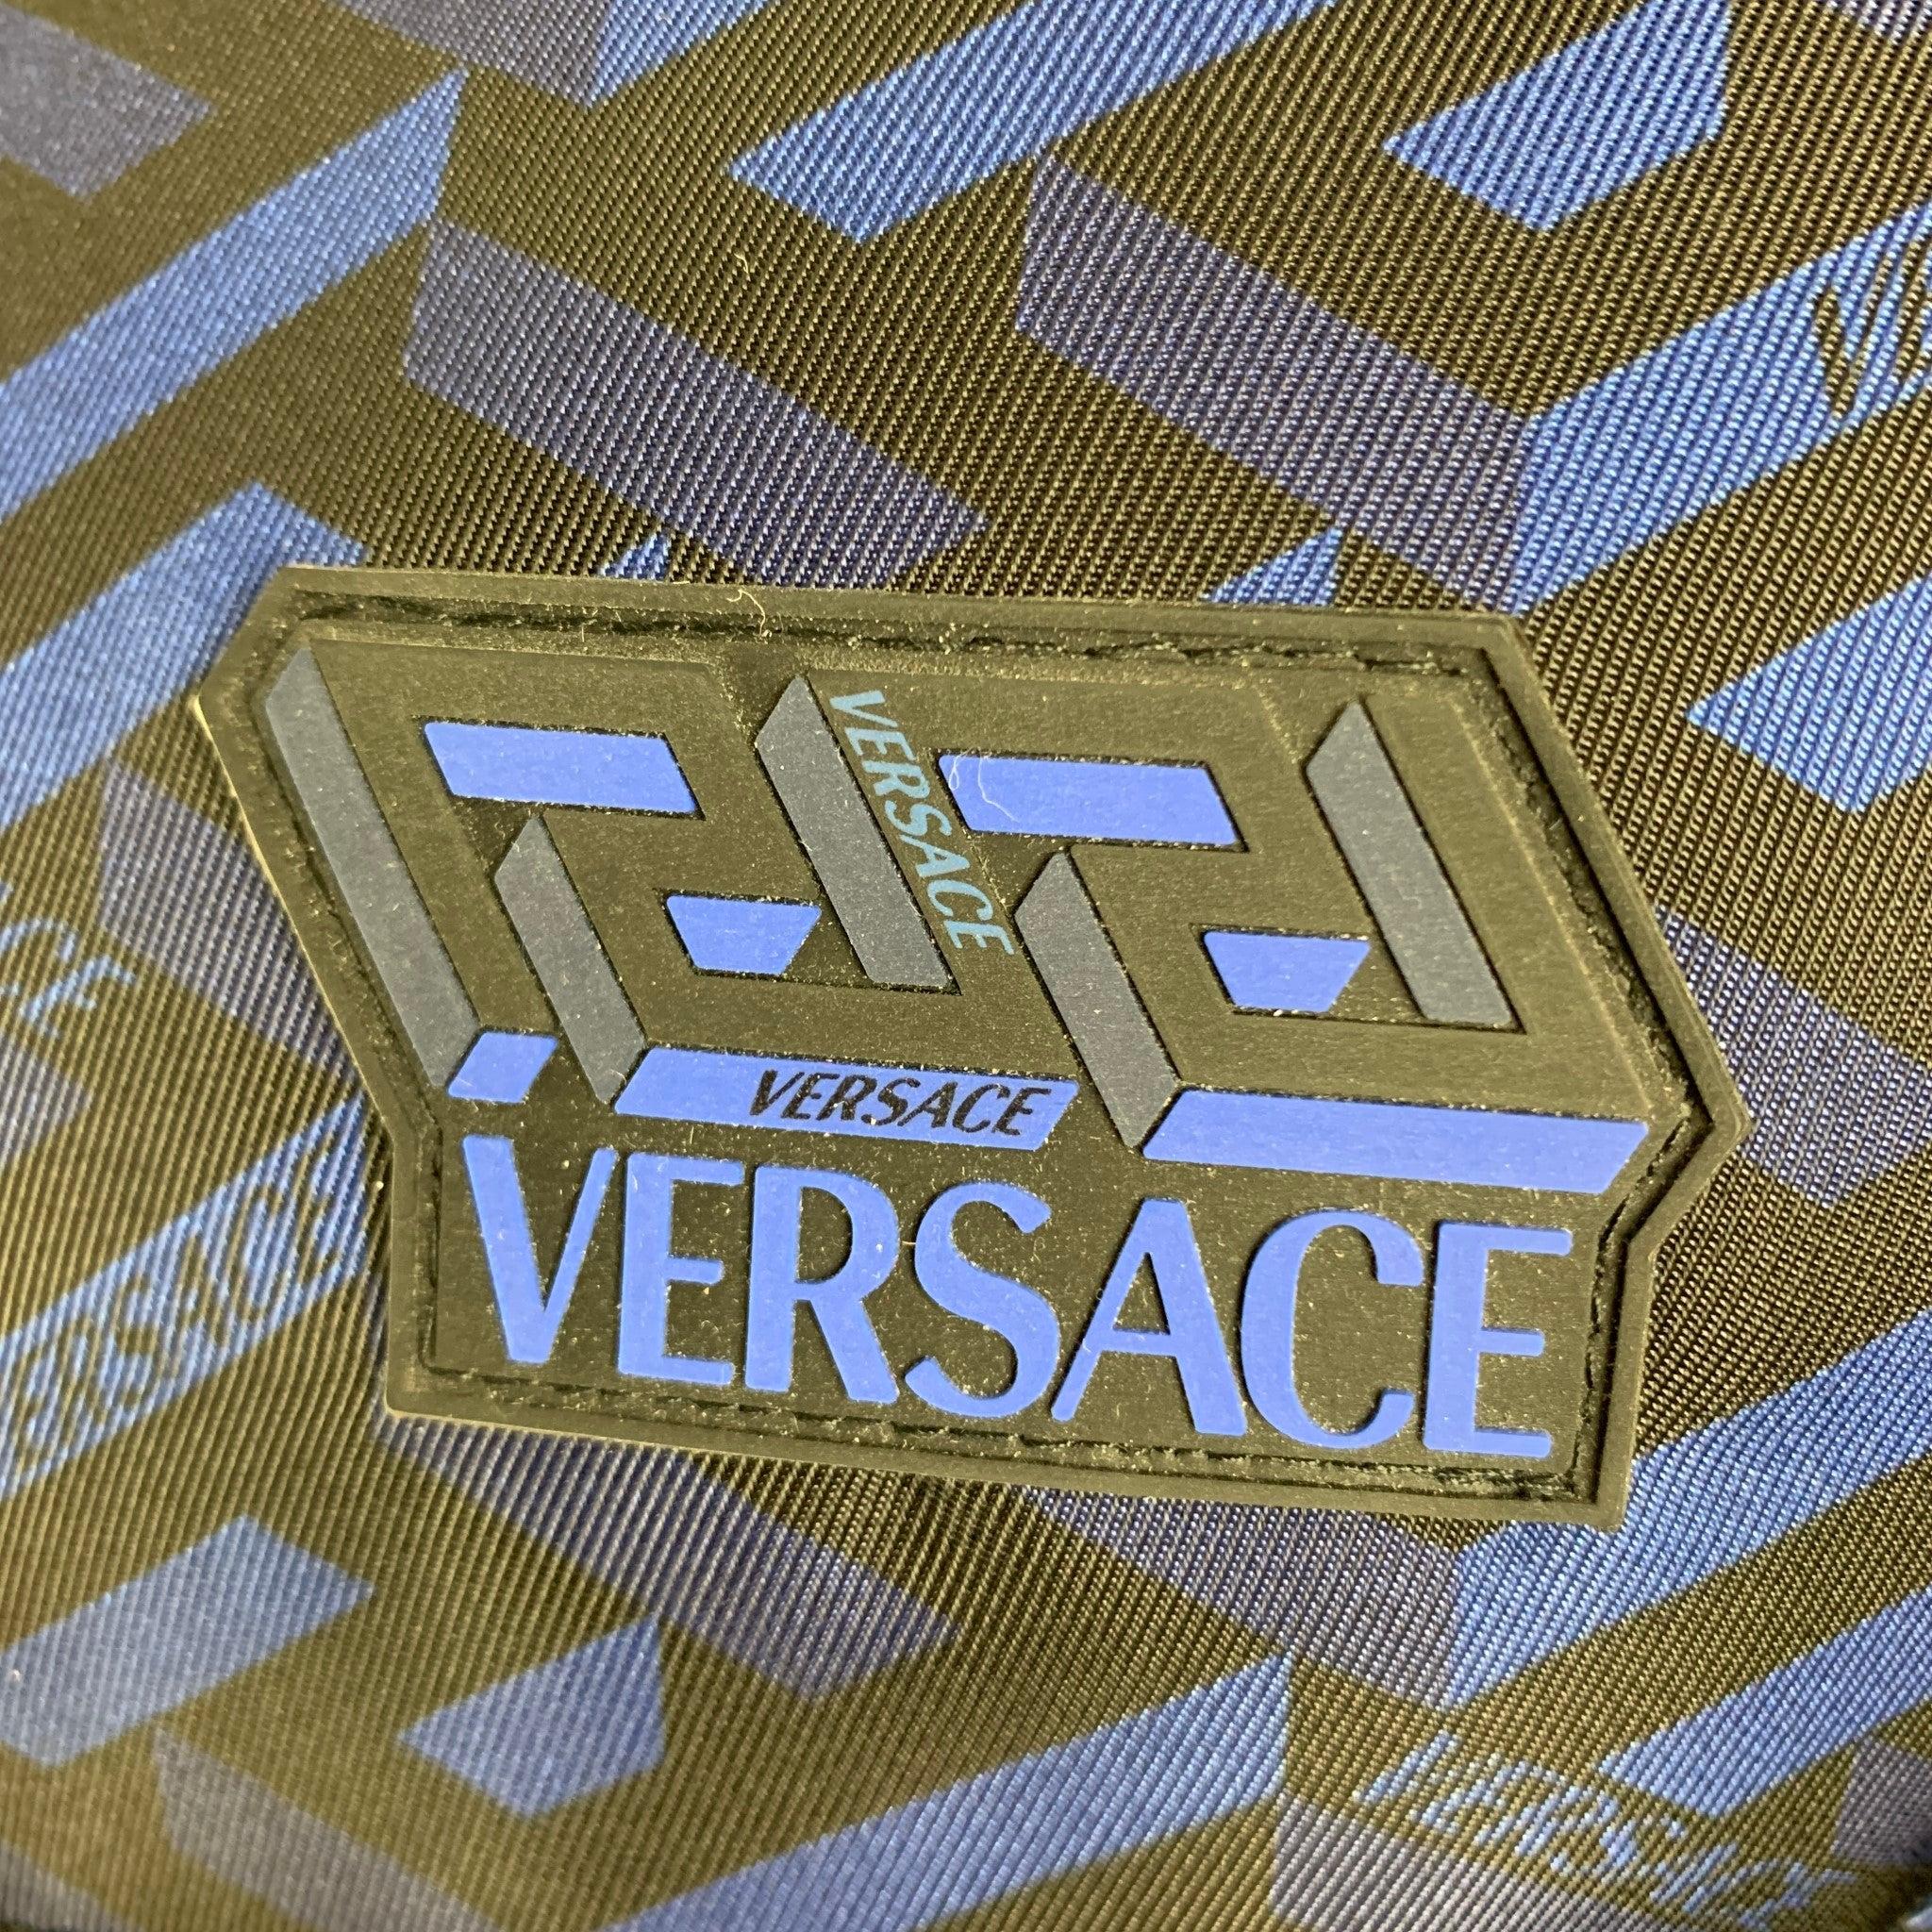 VERSACE Jacket comes in black and navy polyester nylon woven material featuring a versace motif print, puffer look, removable hood, high collar, and
 zipper closure. Made in Italy.Excellent Pre-Owned Condition. 

Marked:   46 

Measurements: 
 